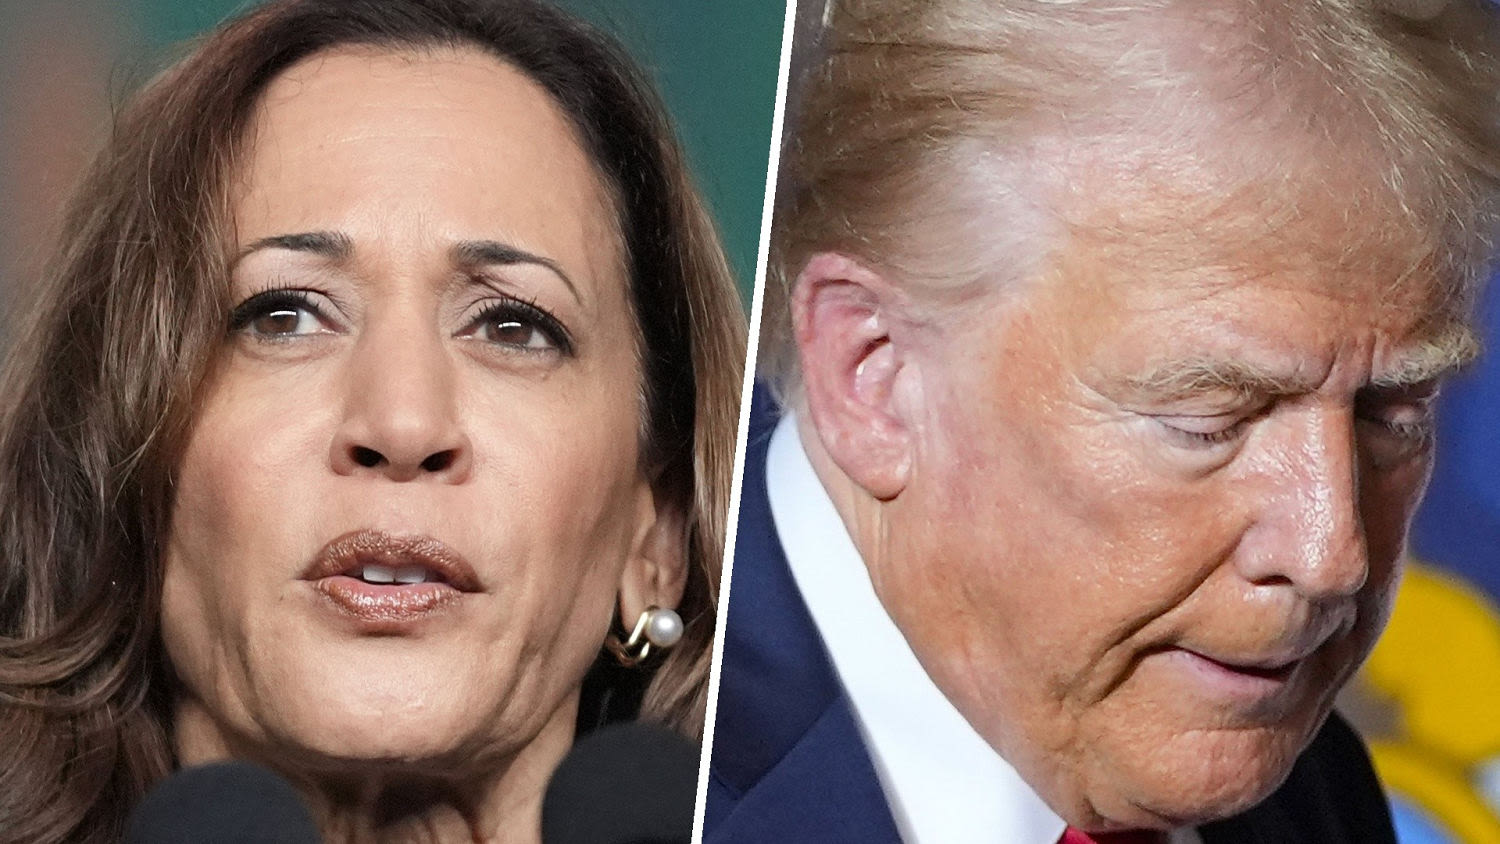 Trump and Harris tied in new poll, but Harris leads with Black voters by a huge margin